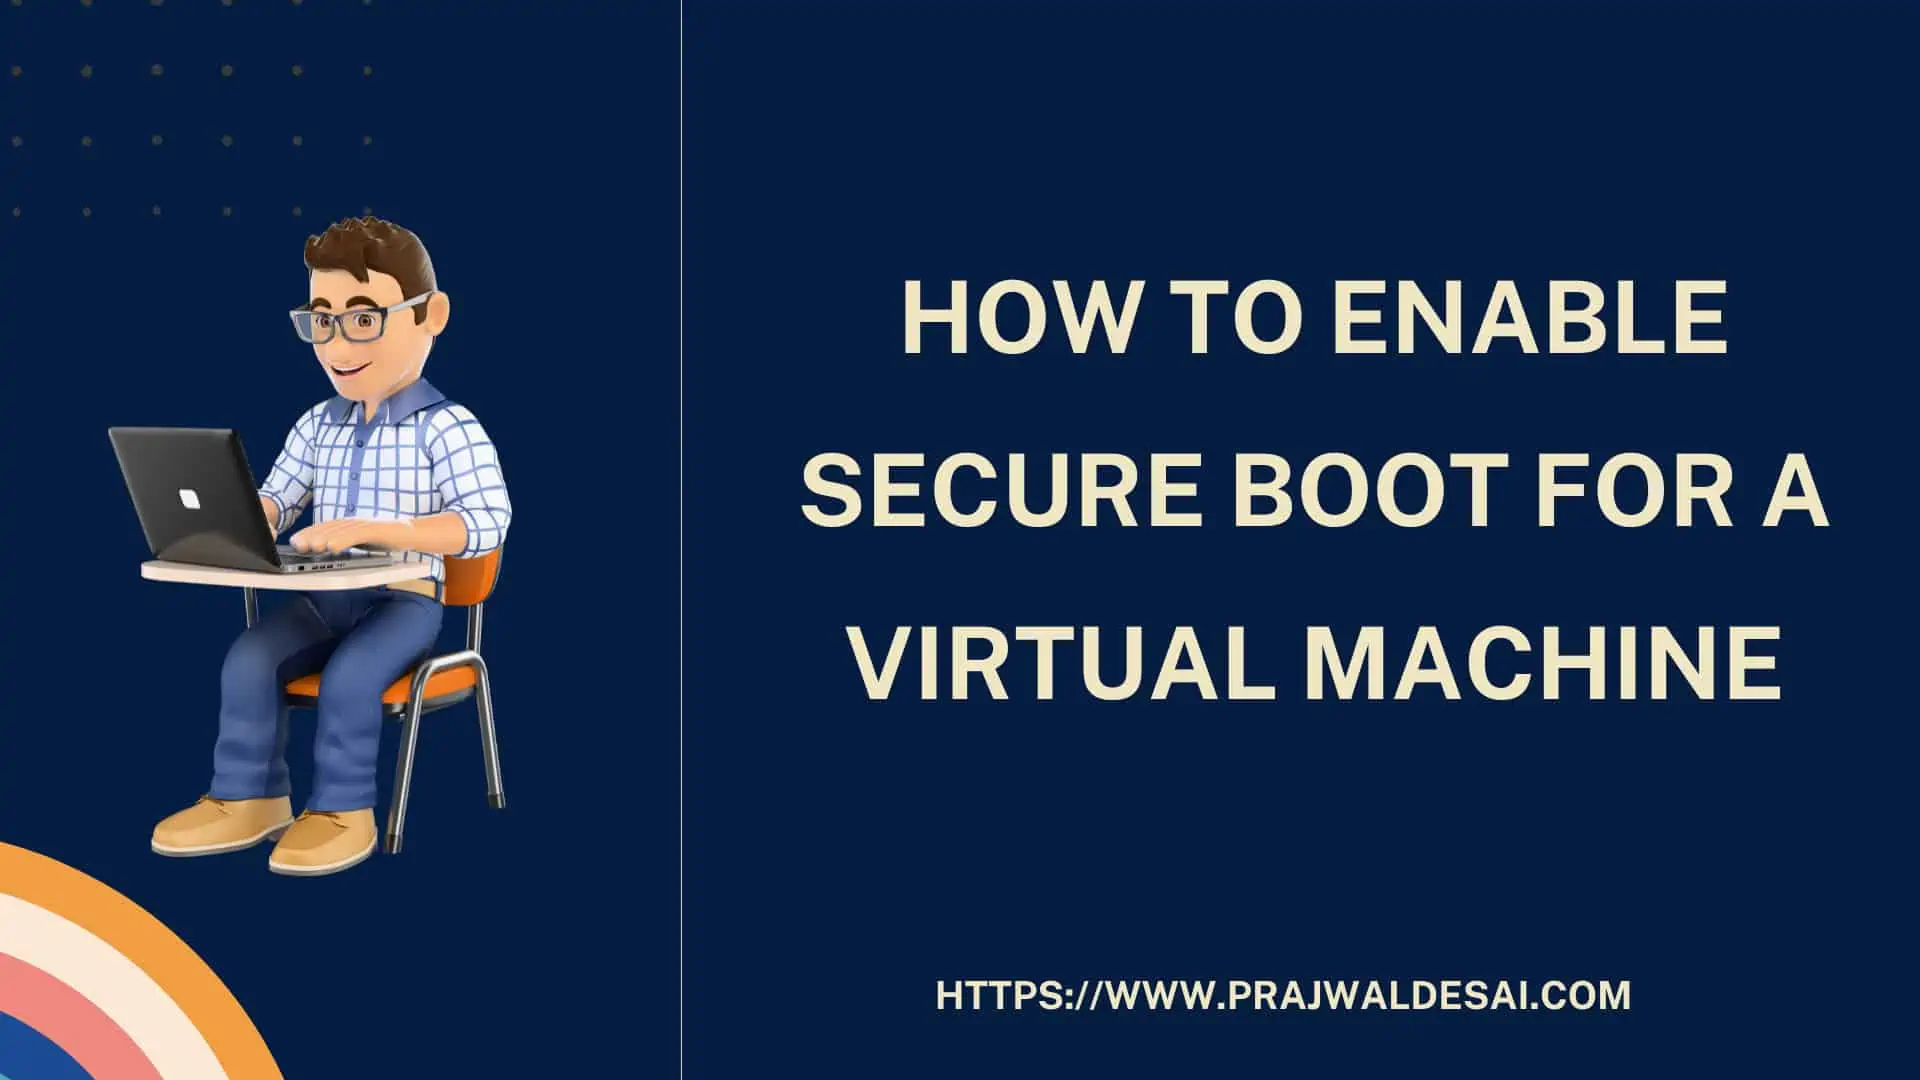 How to Enable Secure Boot for a Virtual Machine